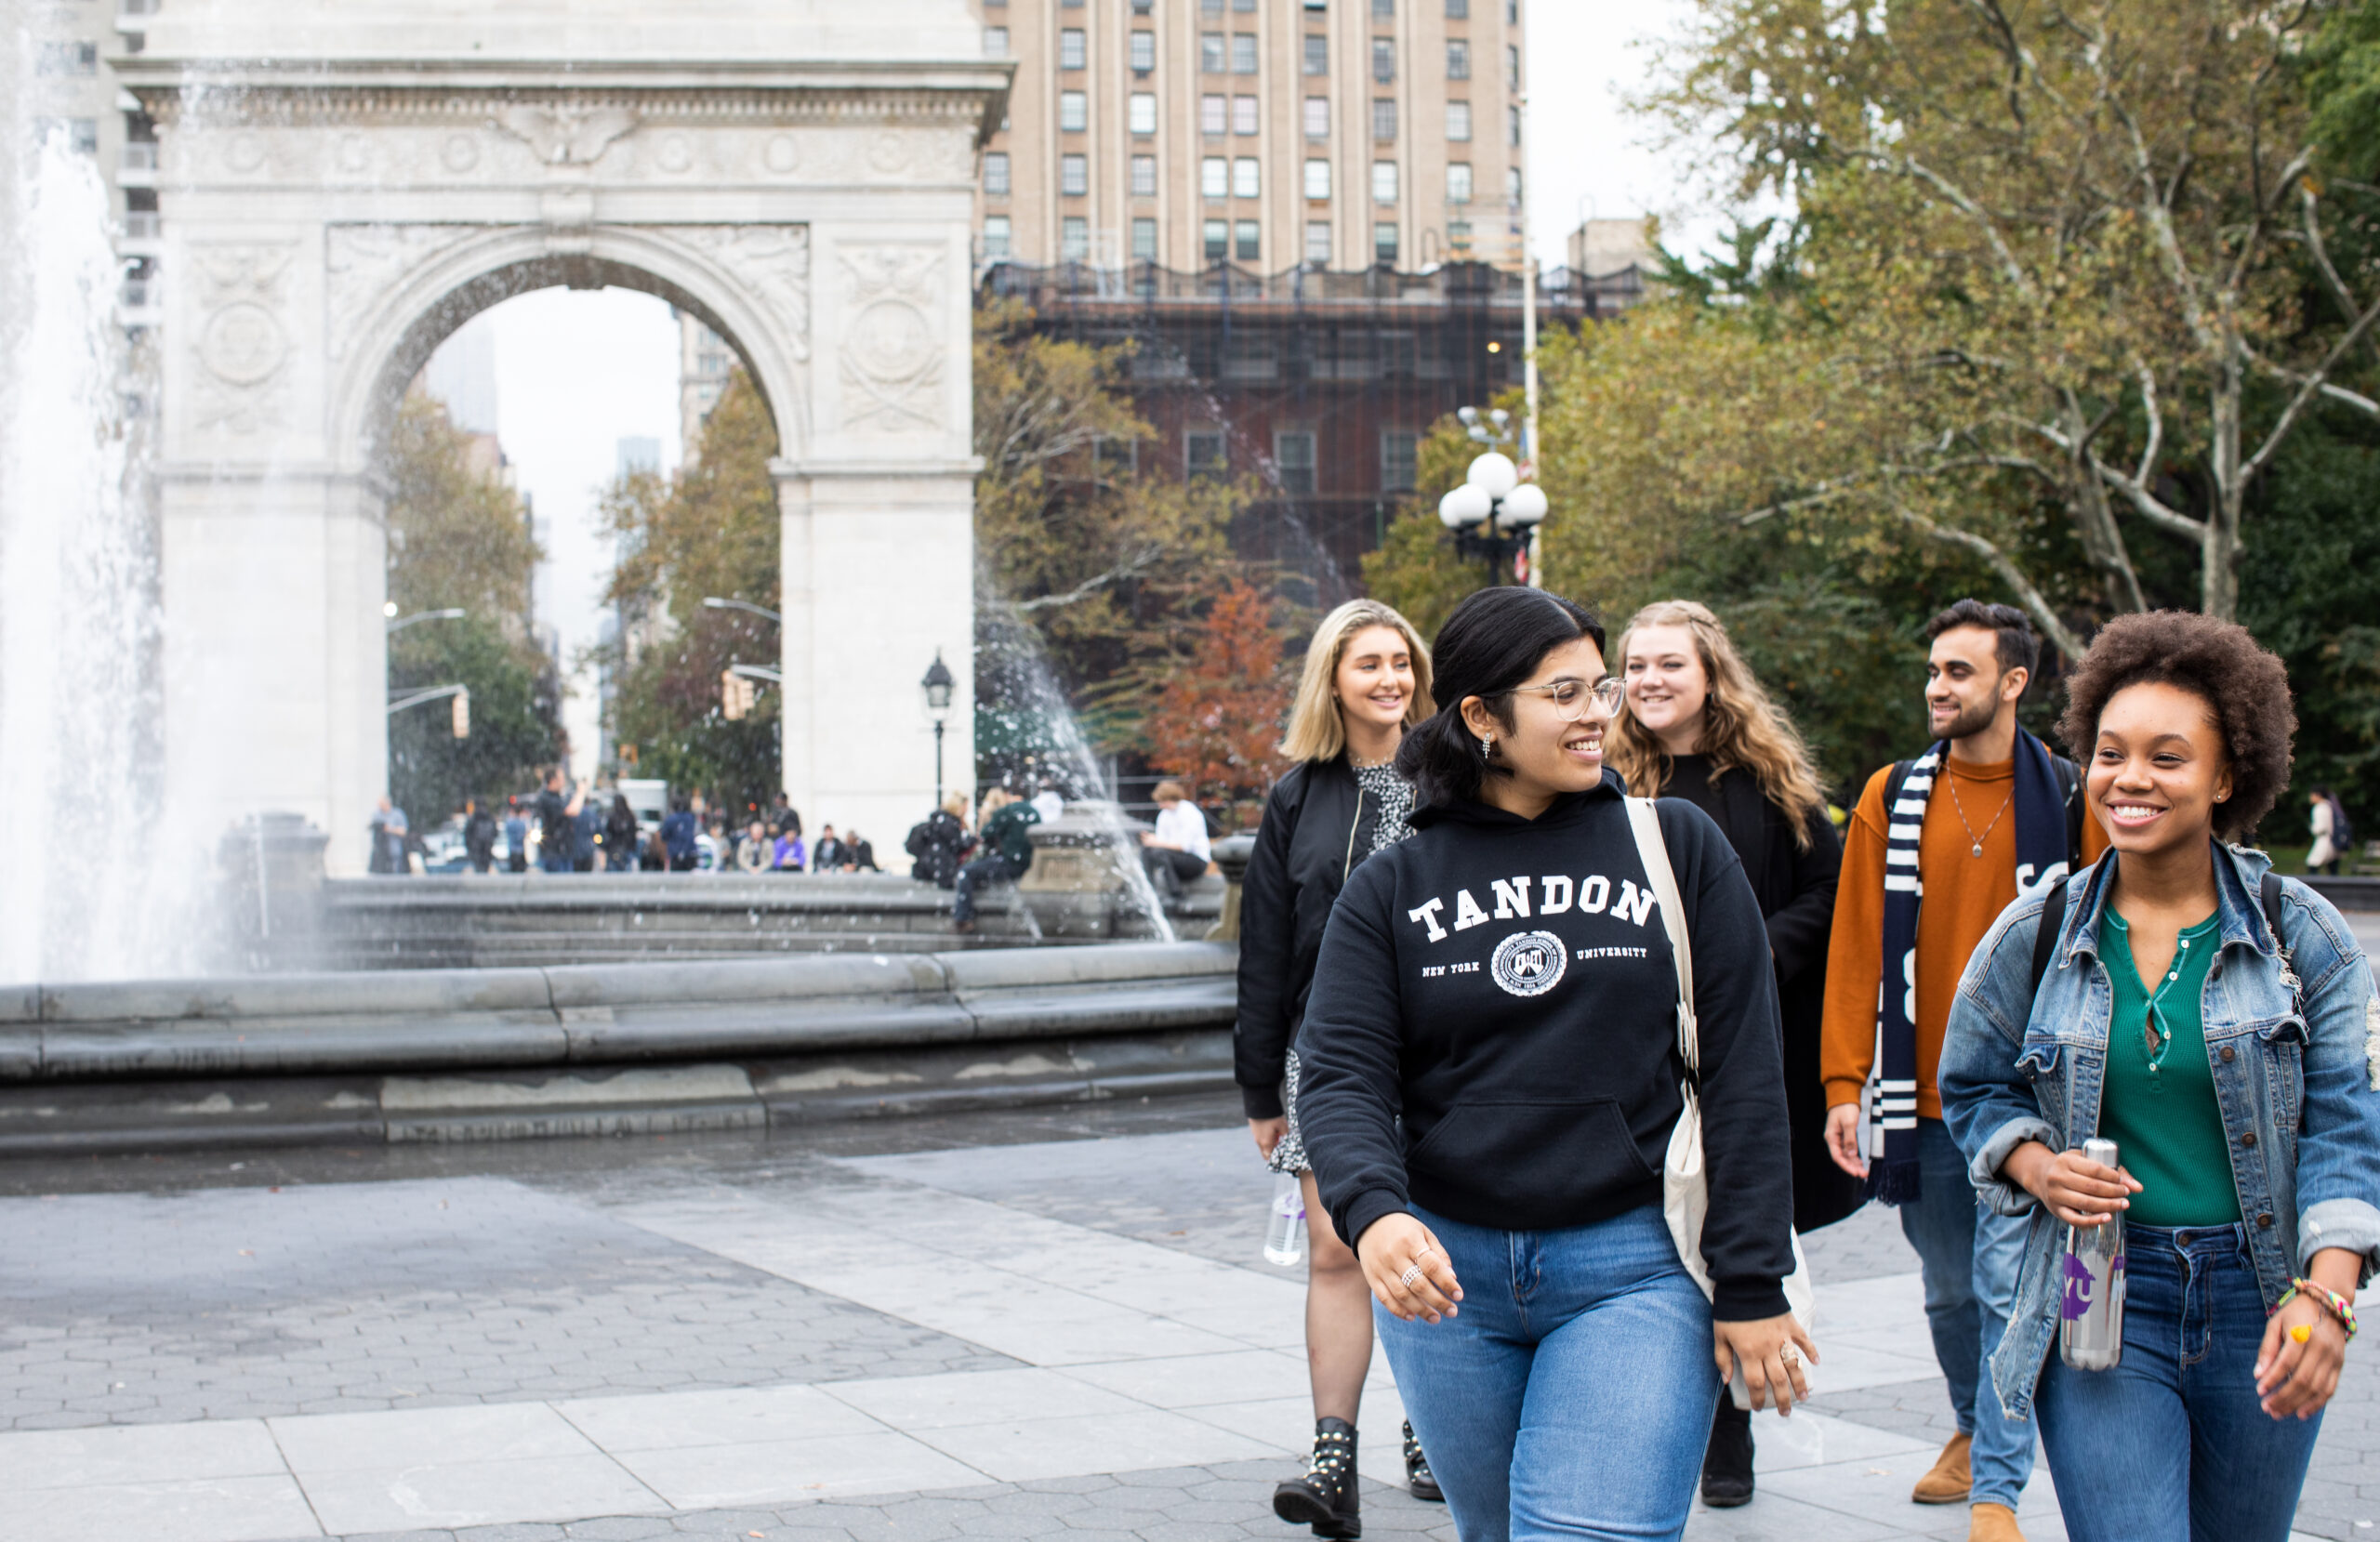 A group of students passing through Washington Square Park together.